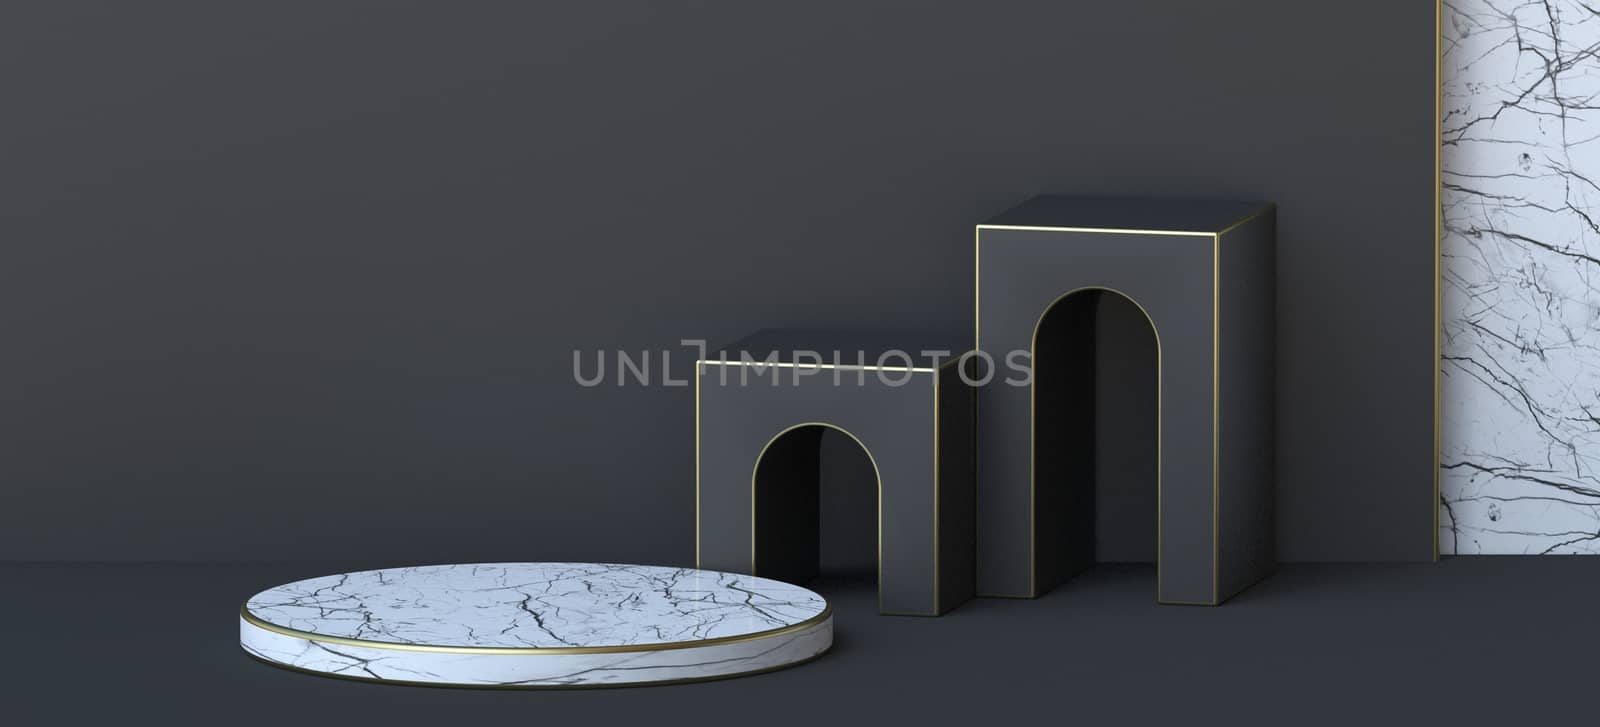 Abstract background white marble podium with two doors 3D render illustration on black background